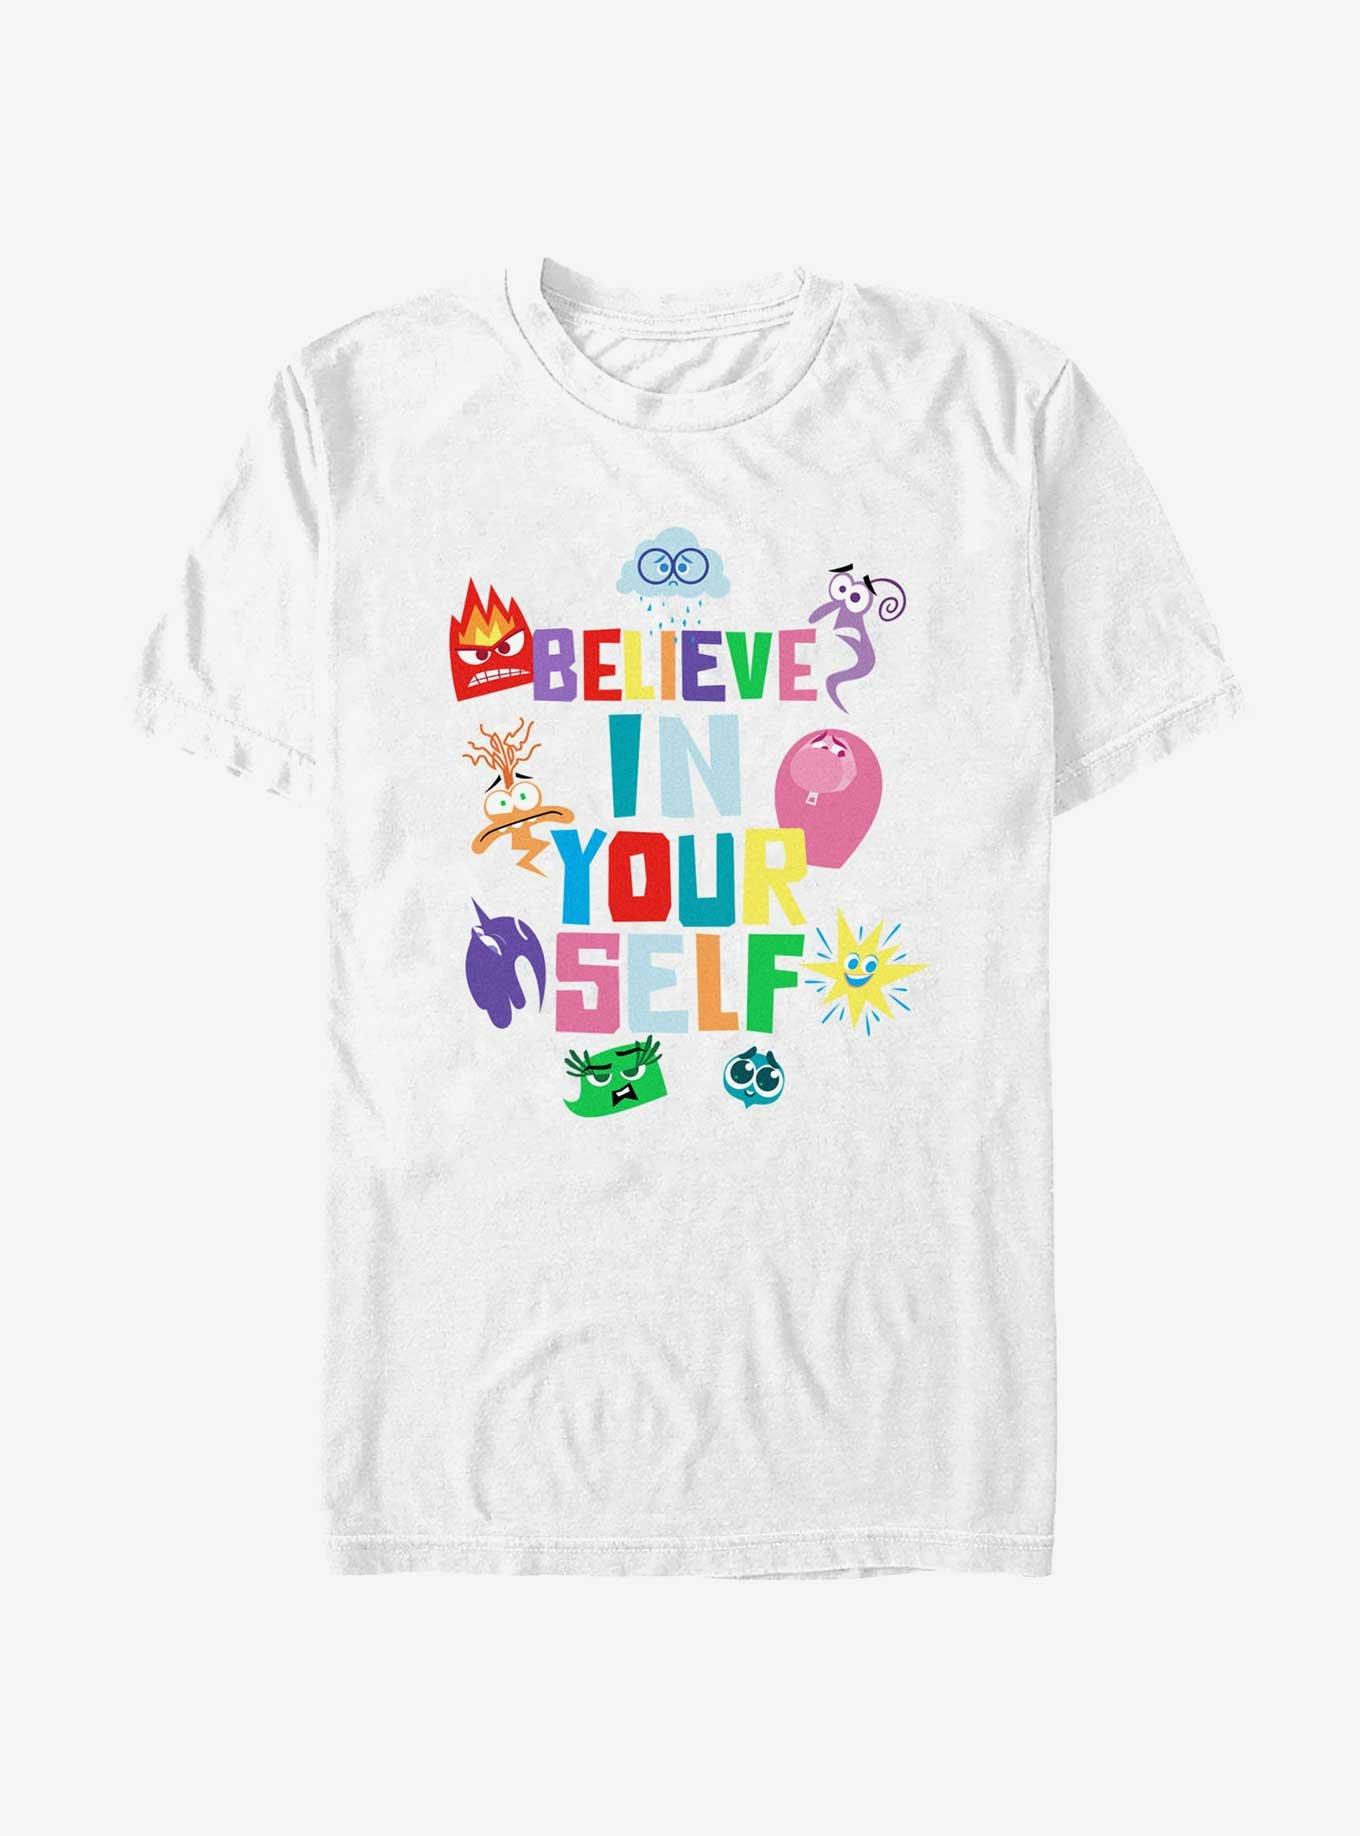 Disney Pixar Inside Out 2 Believe In Your Self T-Shirt, WHITE, hi-res